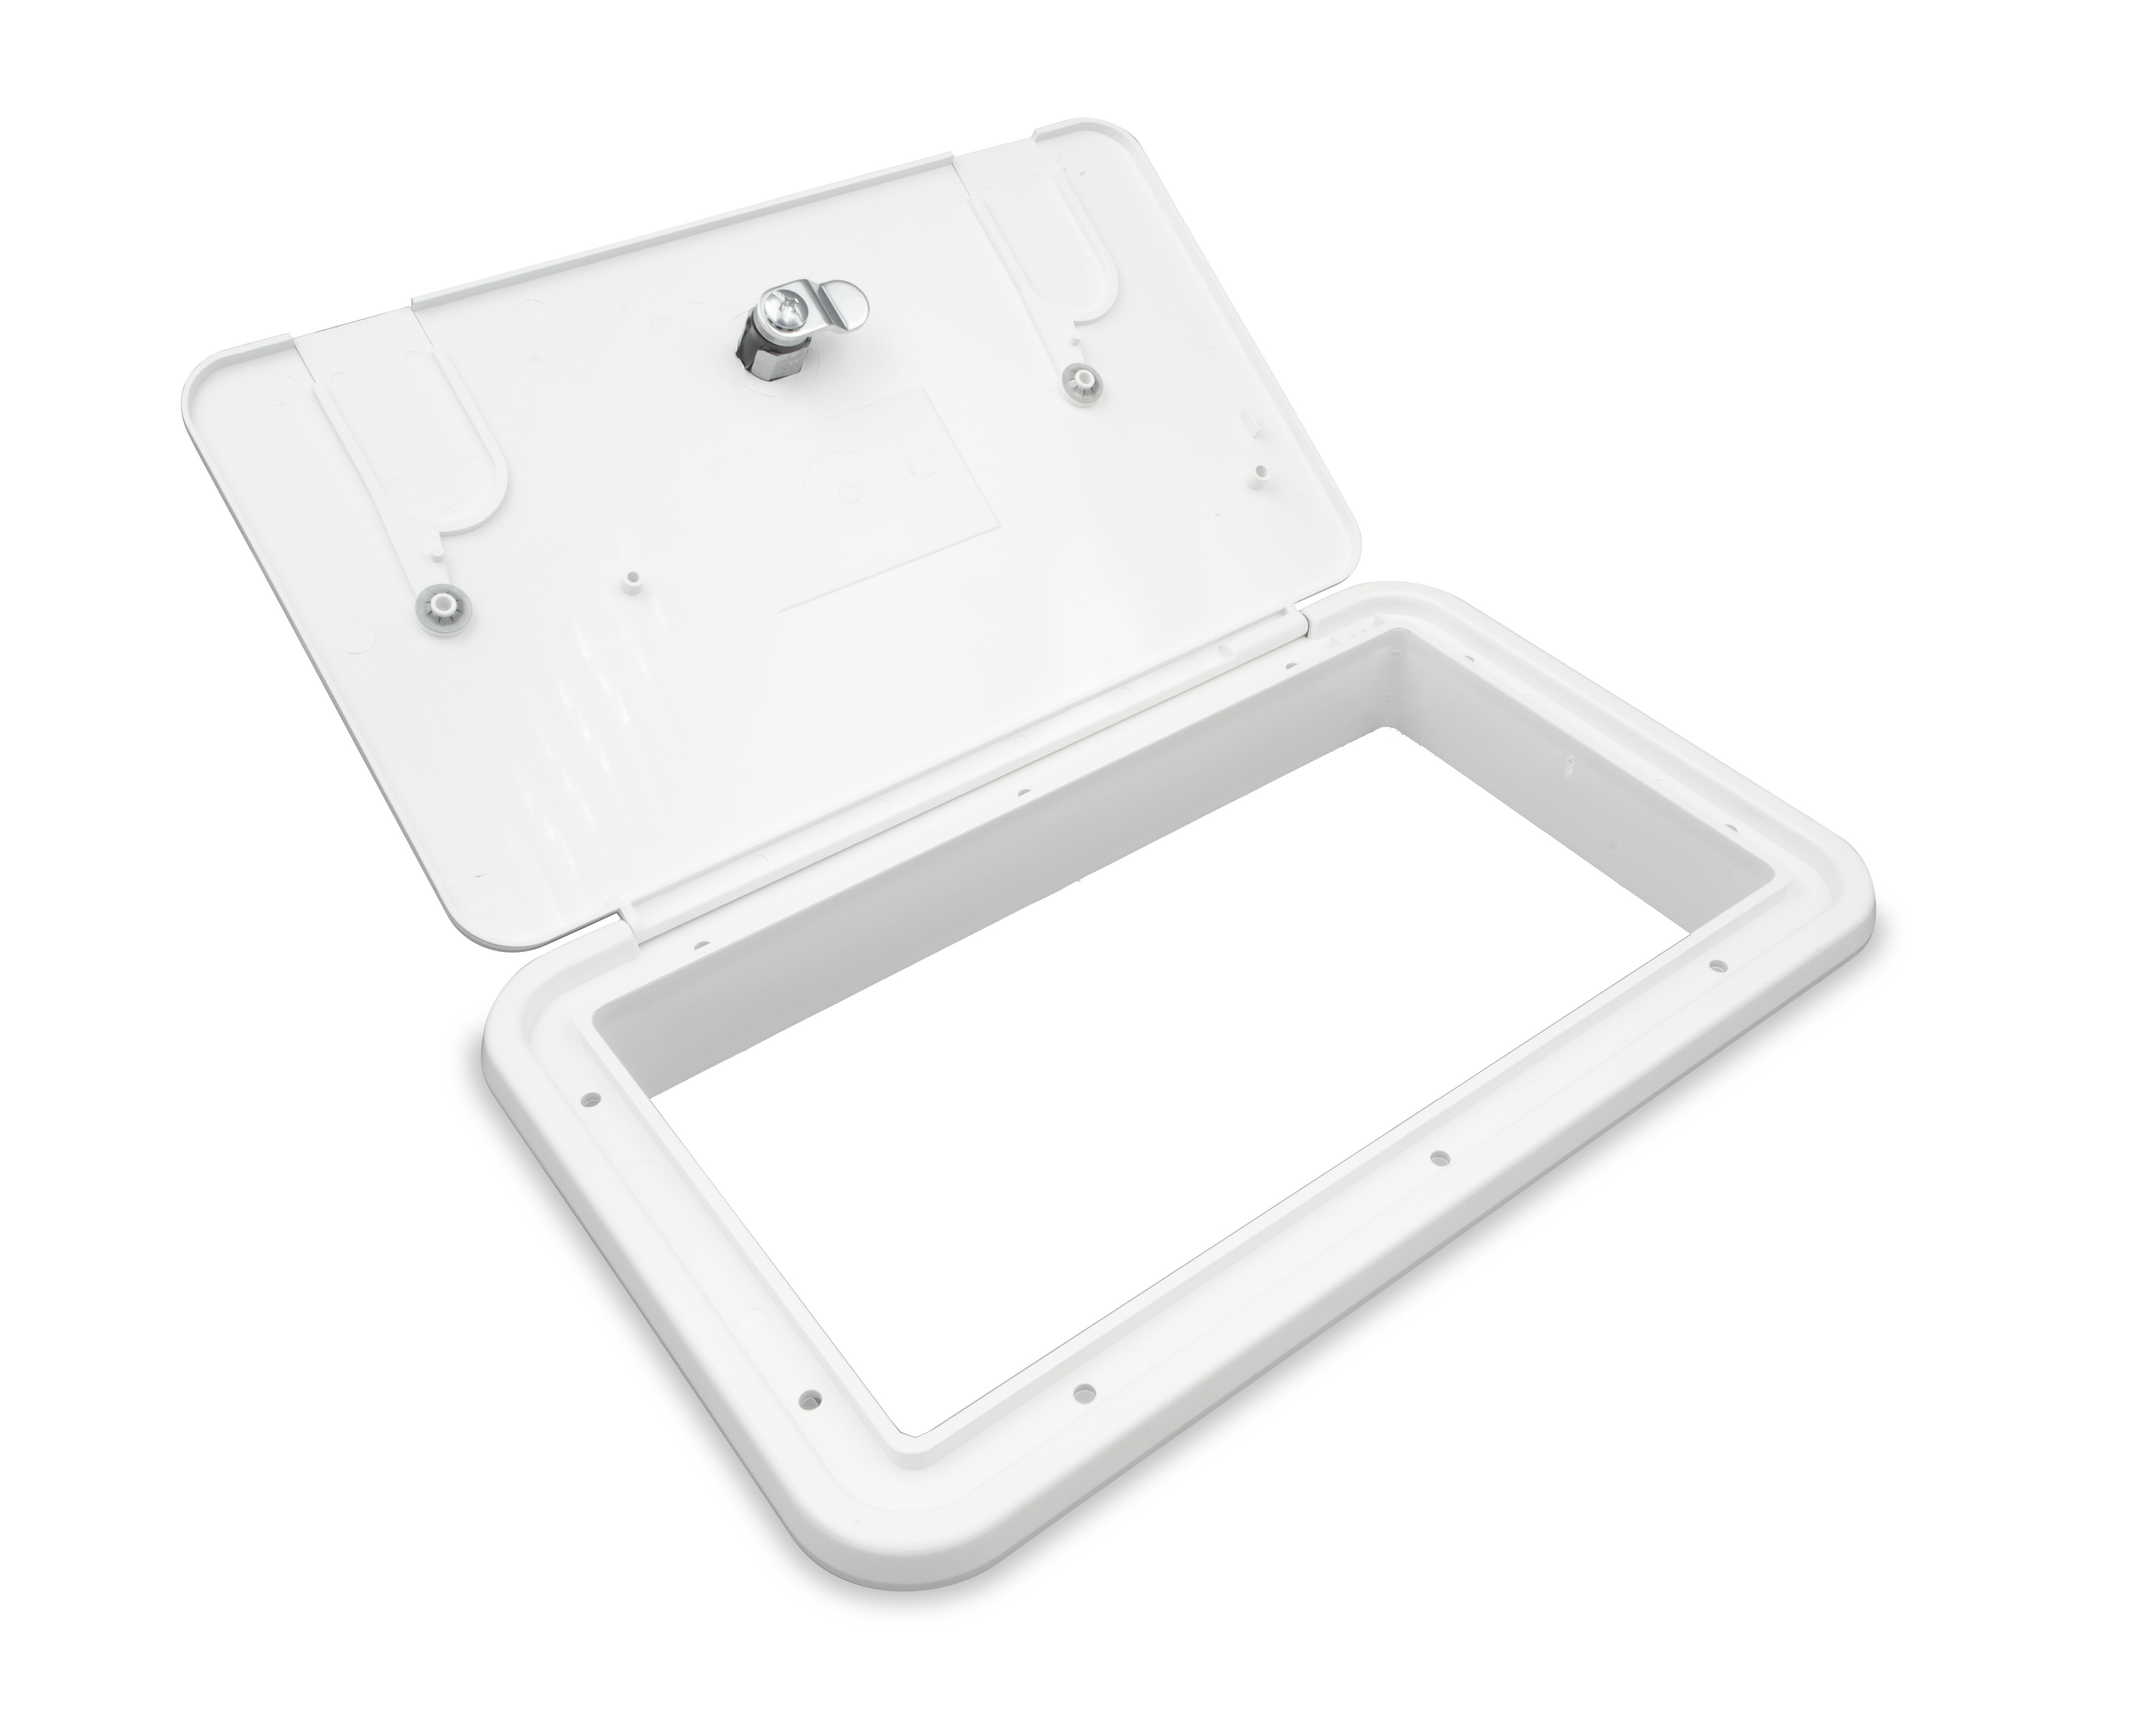 Multi-Purpose Access Hatch with 2 Access Doors - White | Products | Thetford